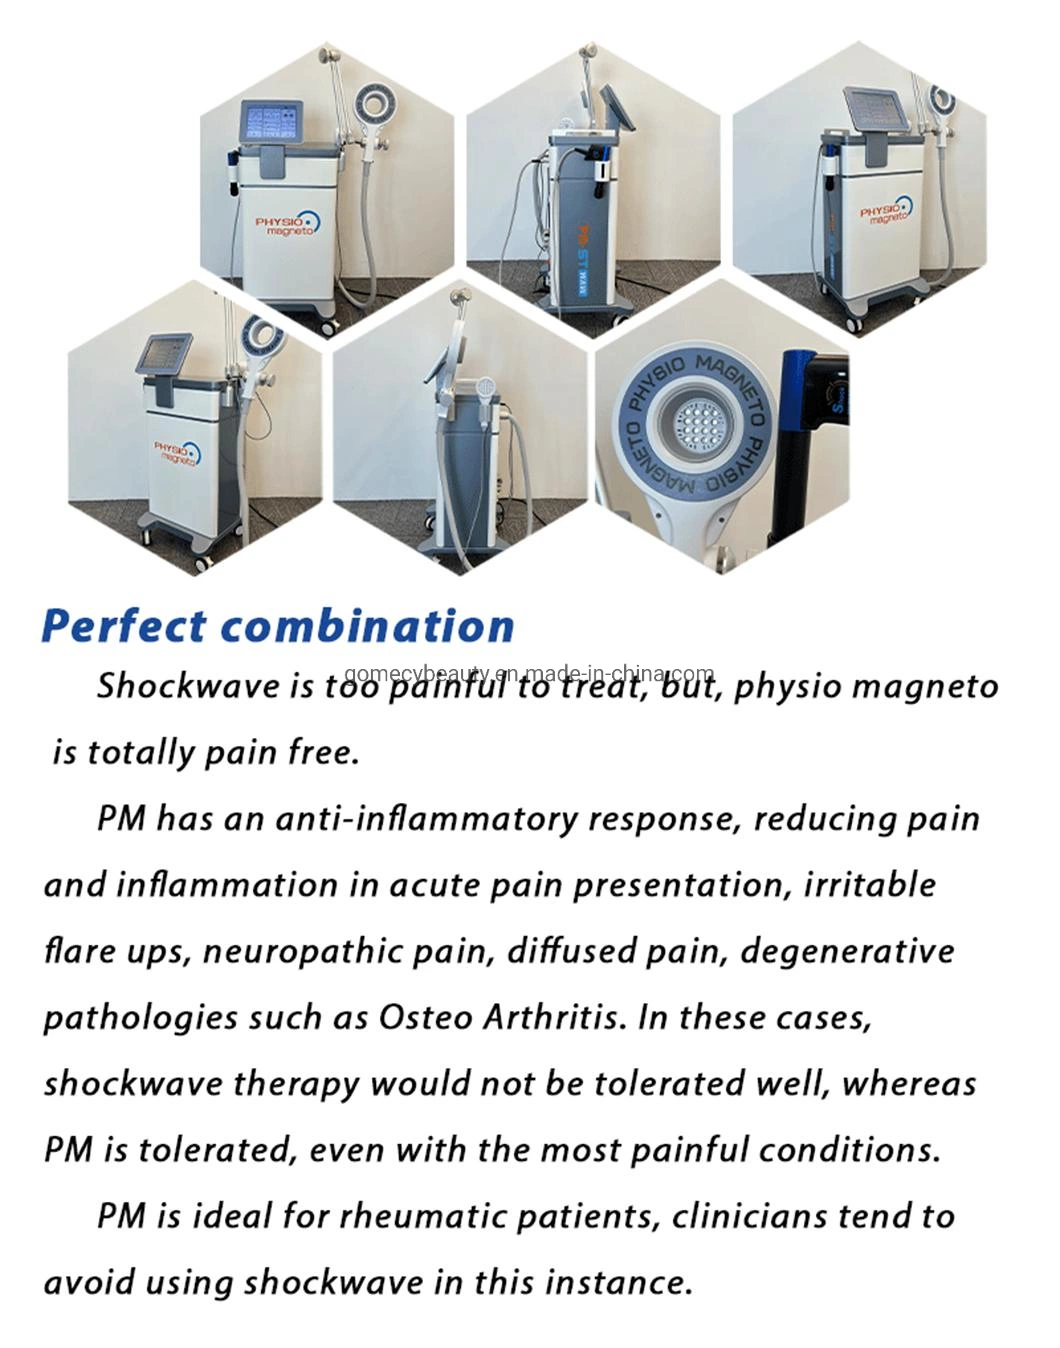 Focused Erectile Dysfunction Physiotherapy Pain Relief Shock Wave Physical Therapy Equipments Eswt ED Shockwave Therapy Machine